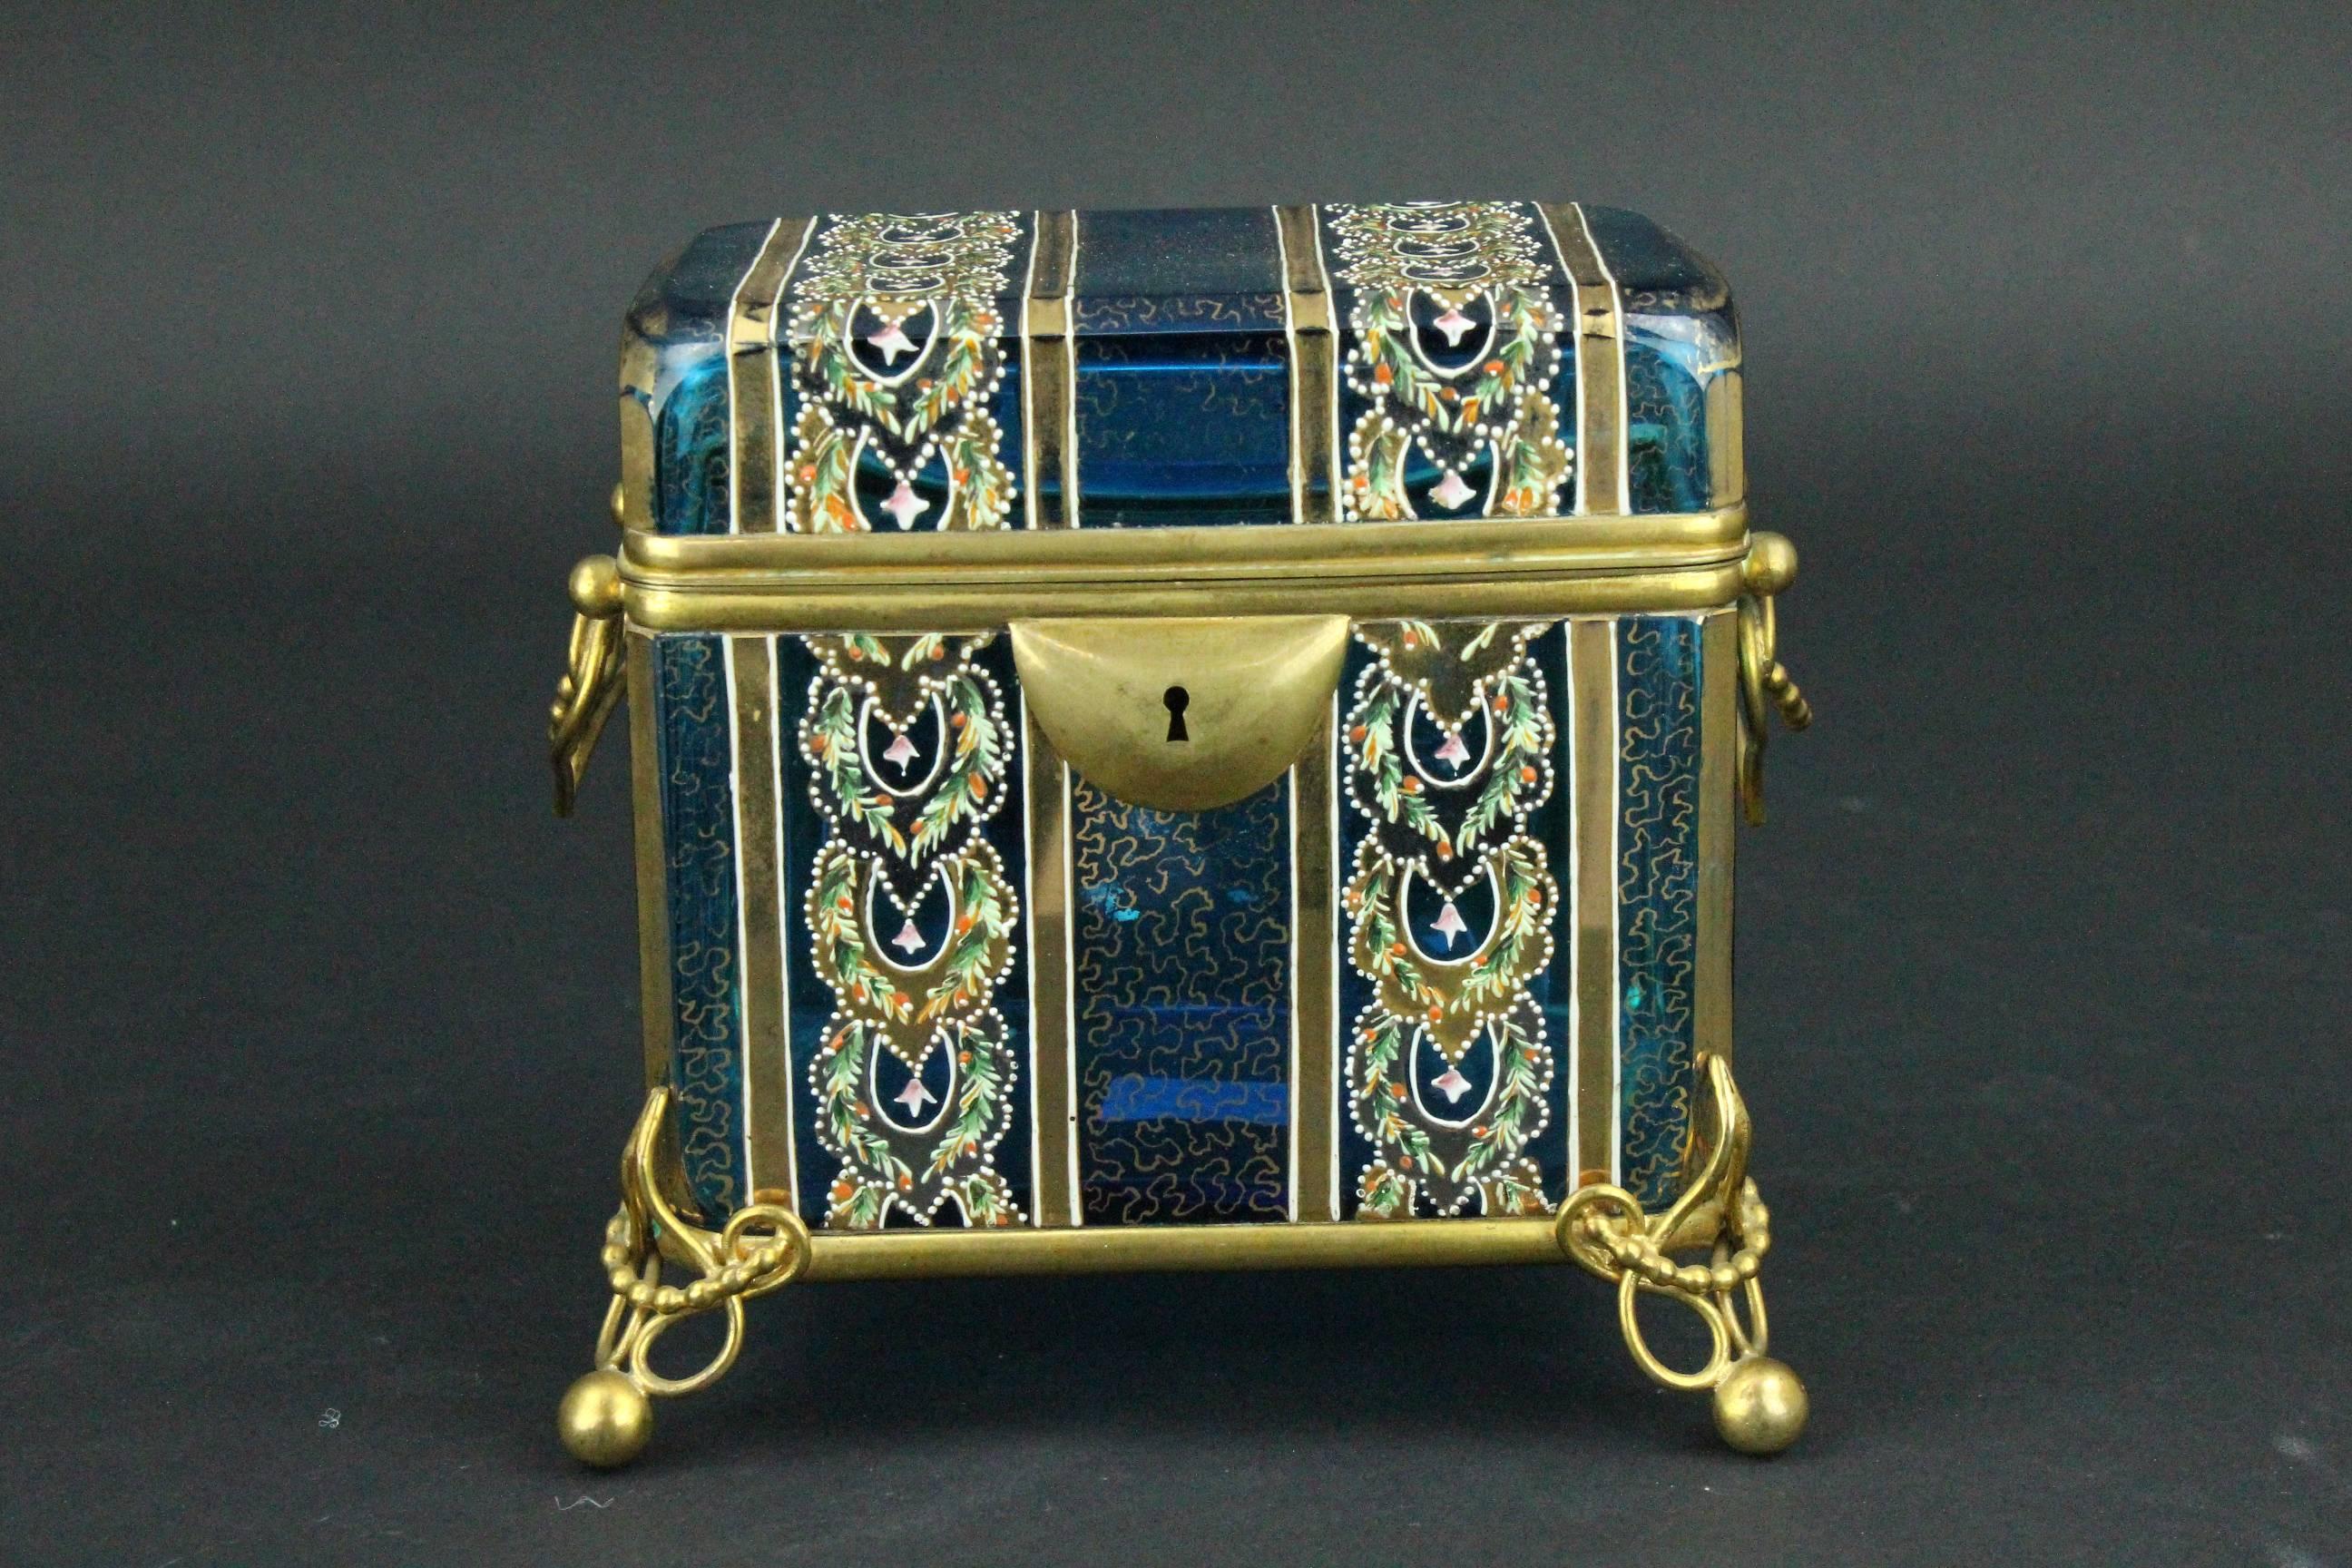 This turquoise blue glass box is very elegant and stylish. Can be used as a jewelry box or will make a great statement on its own. Some rubbing to the gilding otherwise in a very good condition. No key.